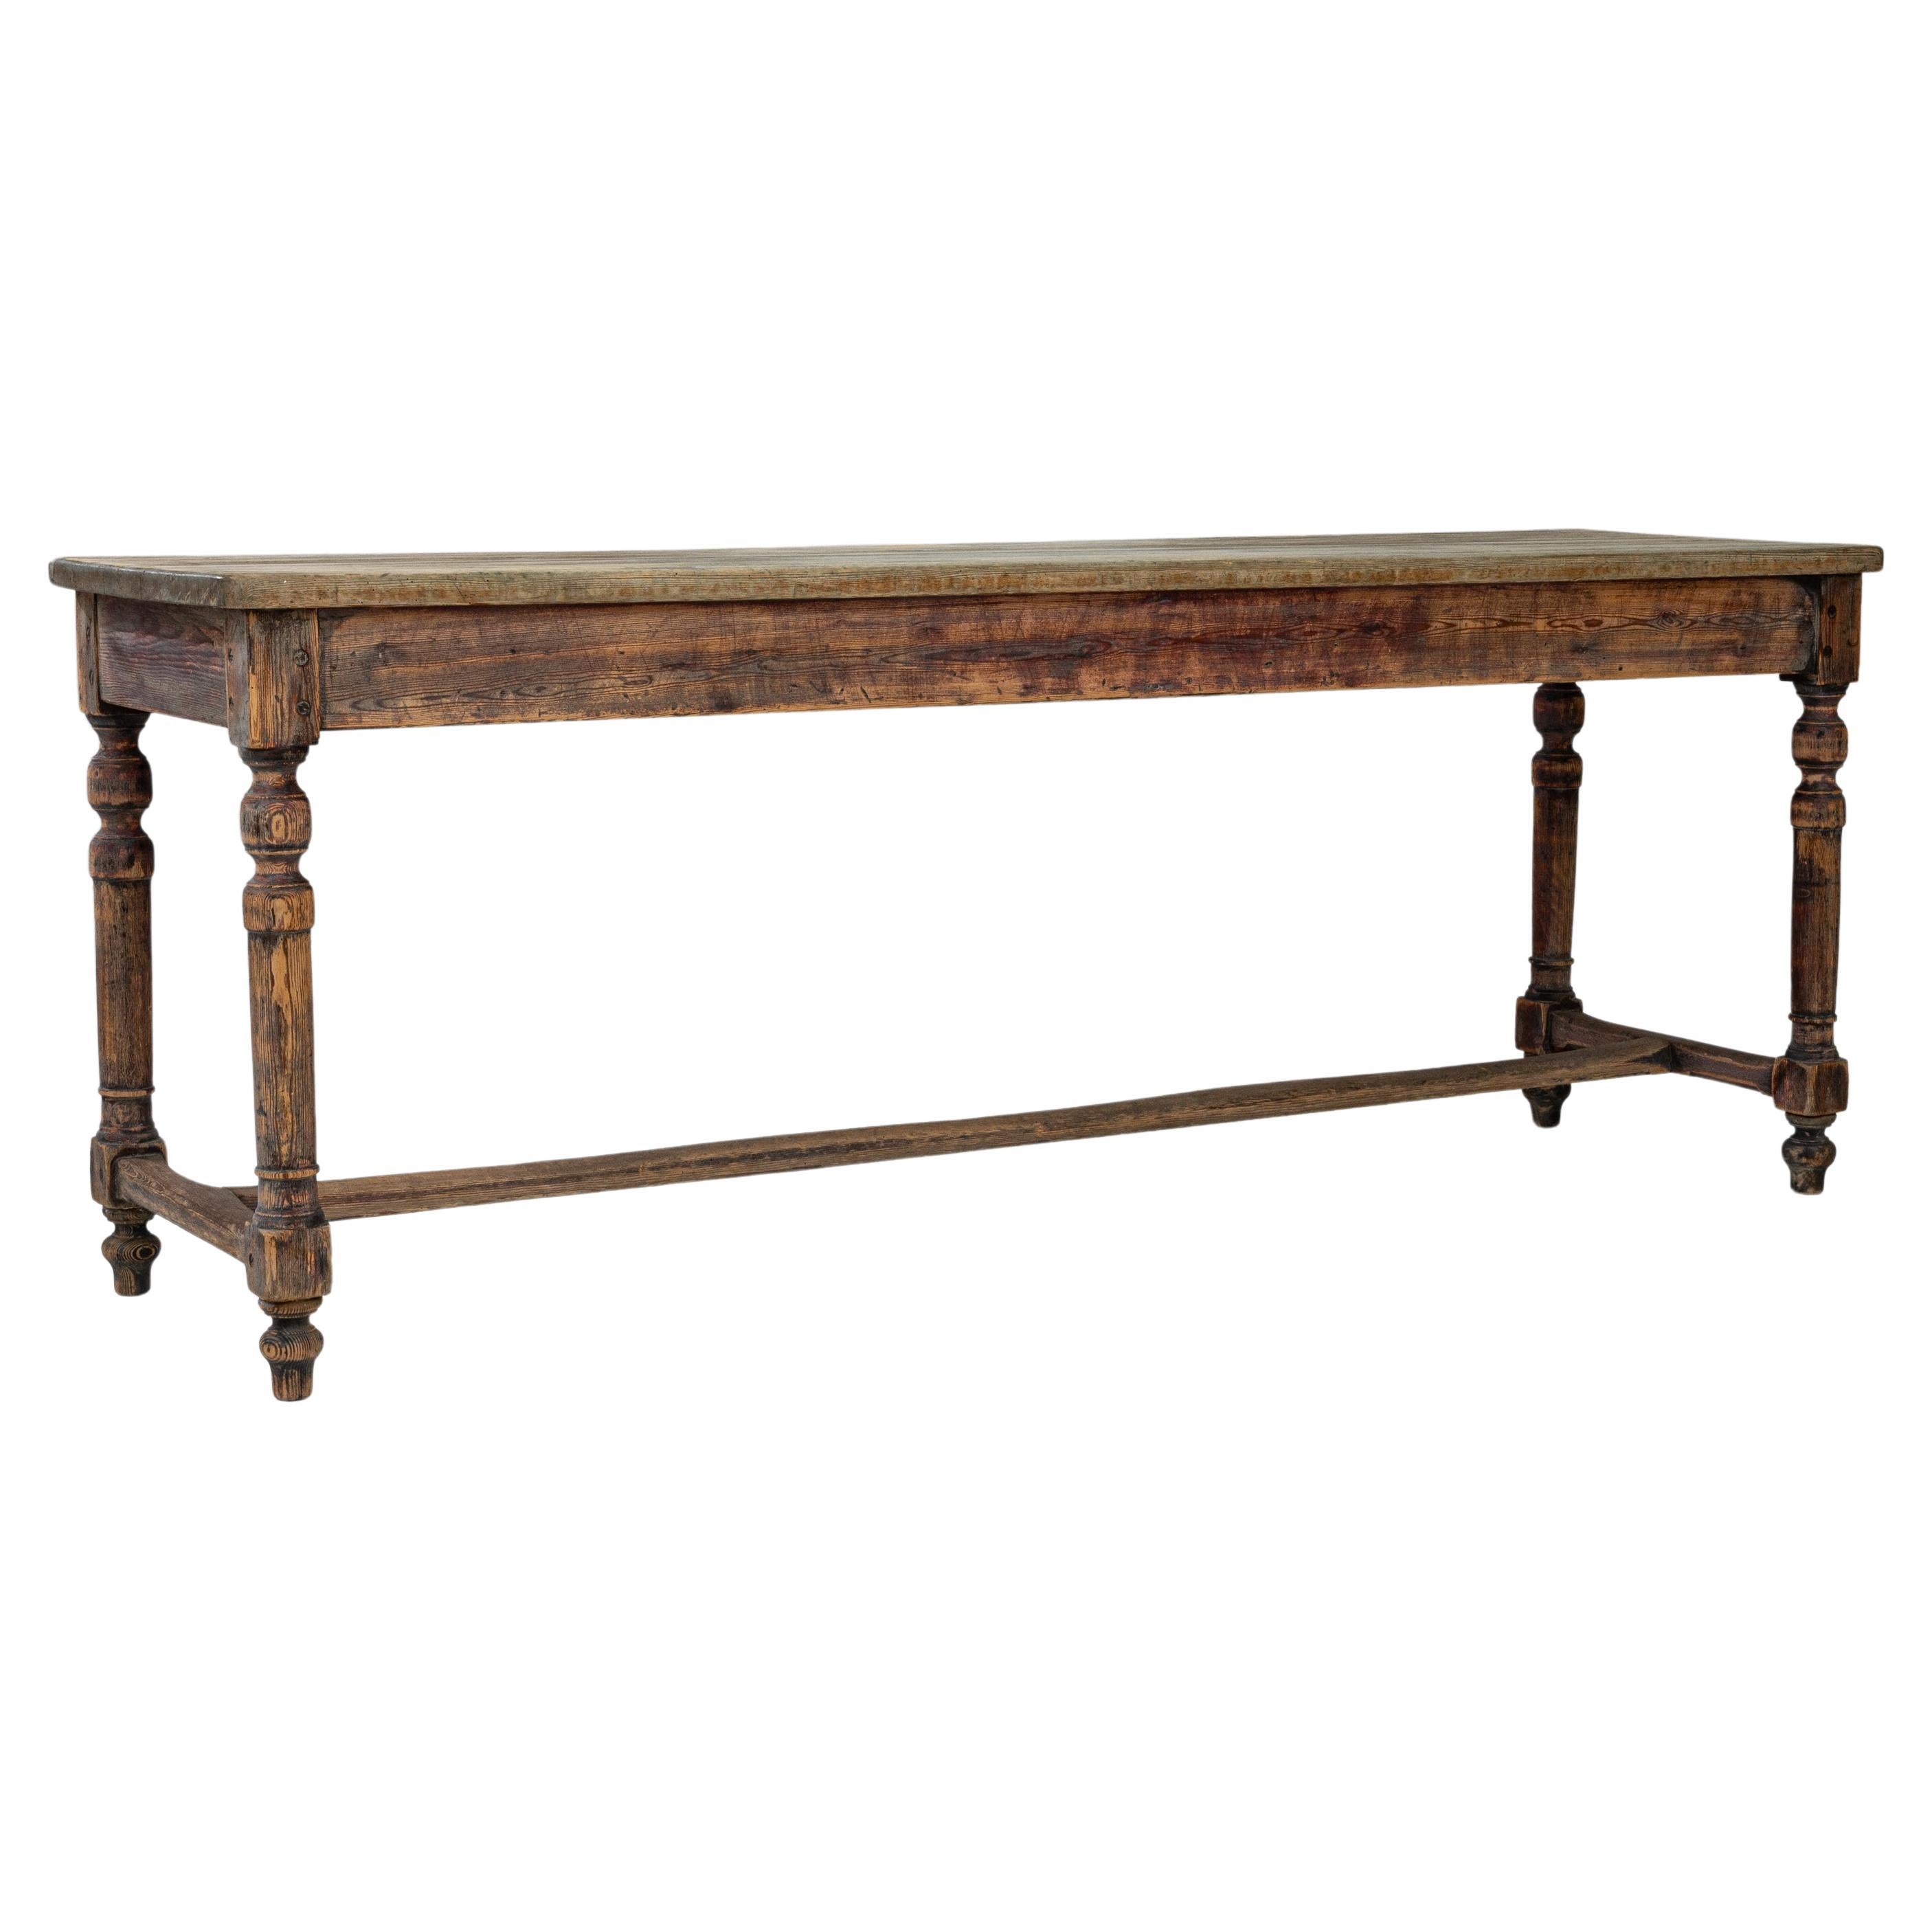 19th Century French Wooden Dining Table